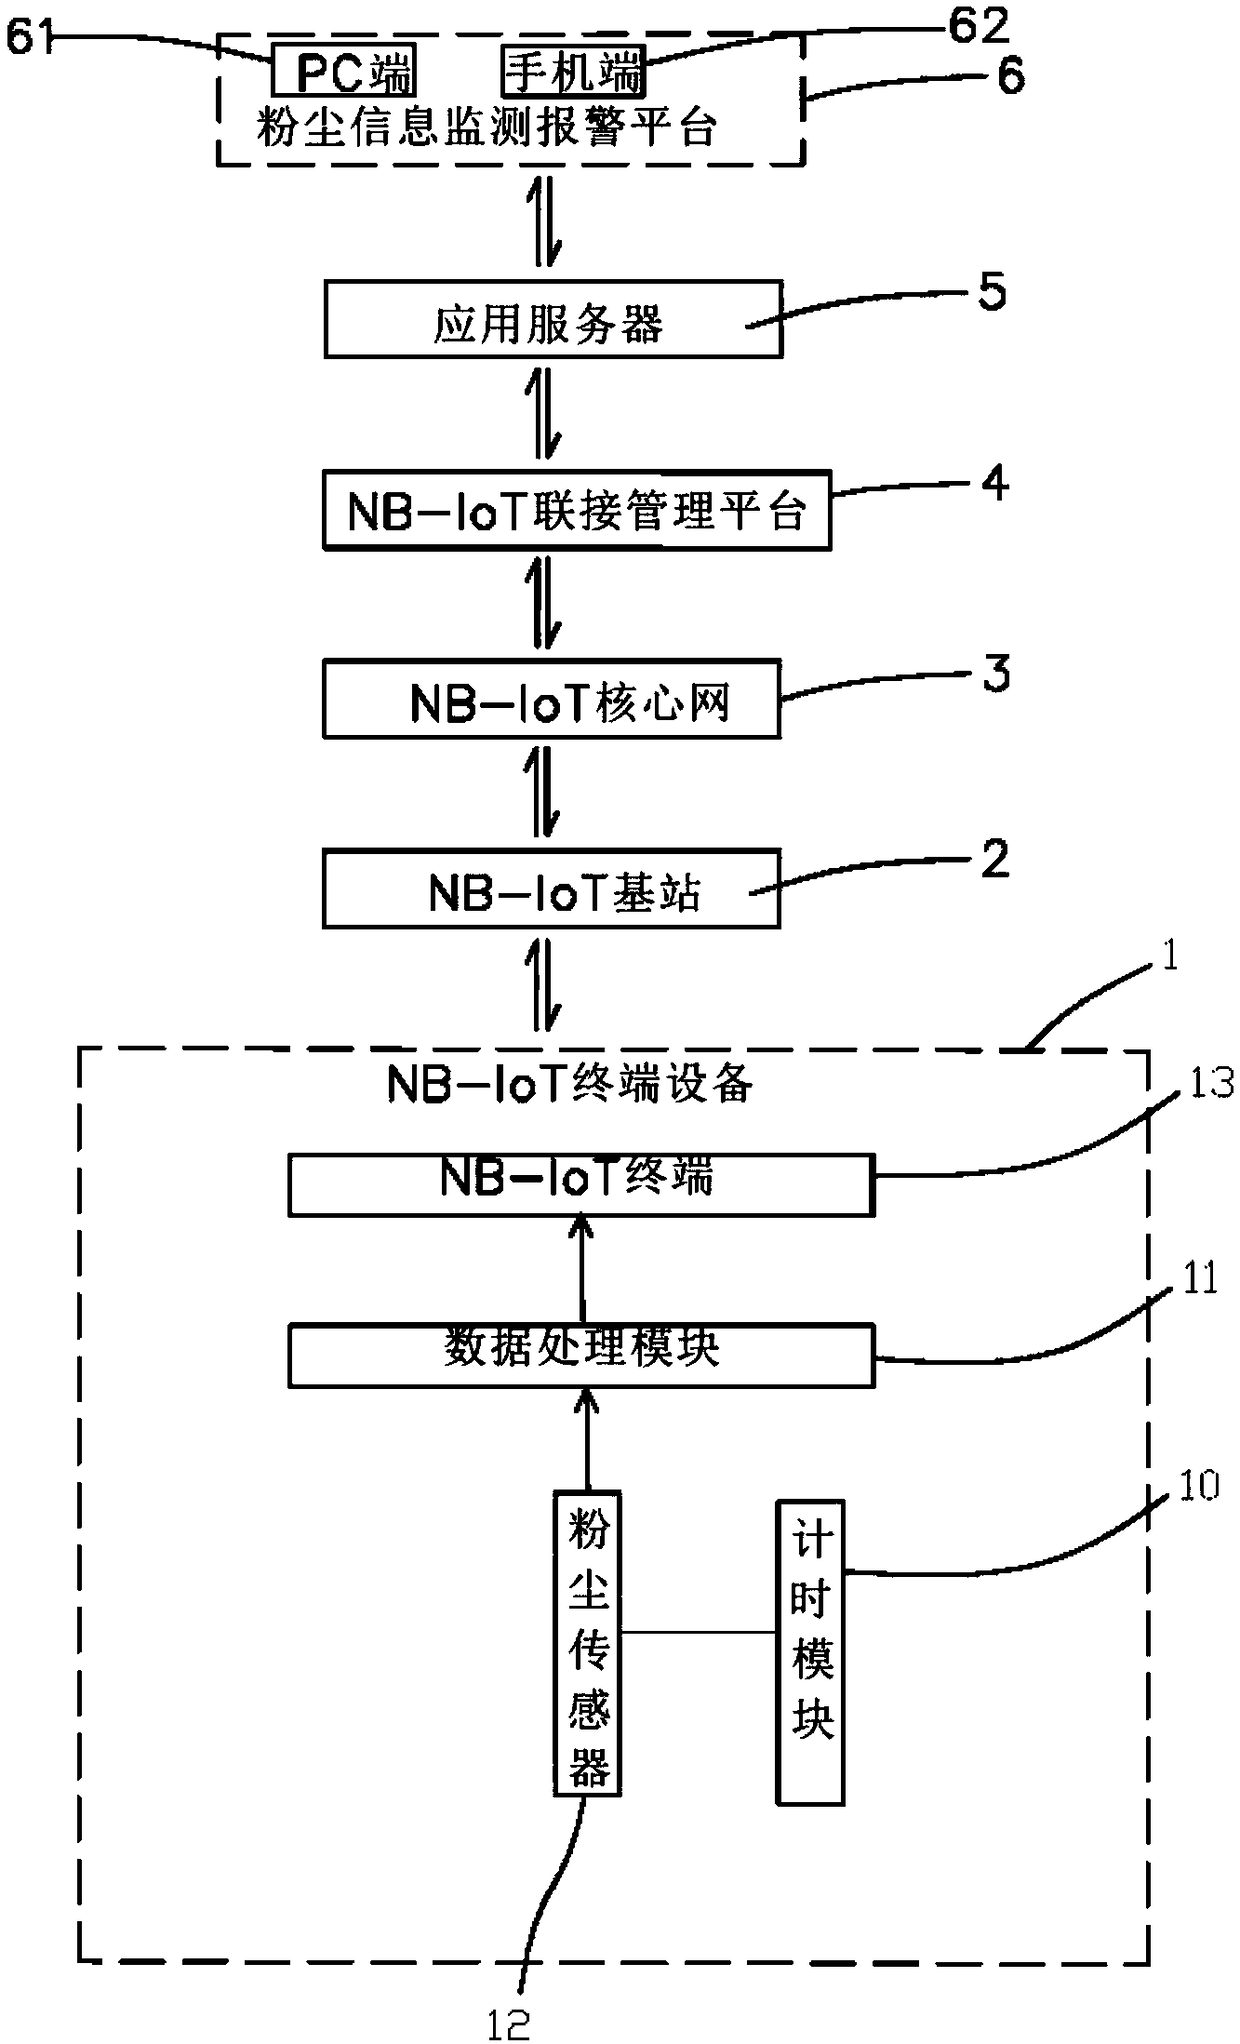 Dust monitoring method and system based on narrowband internet of things